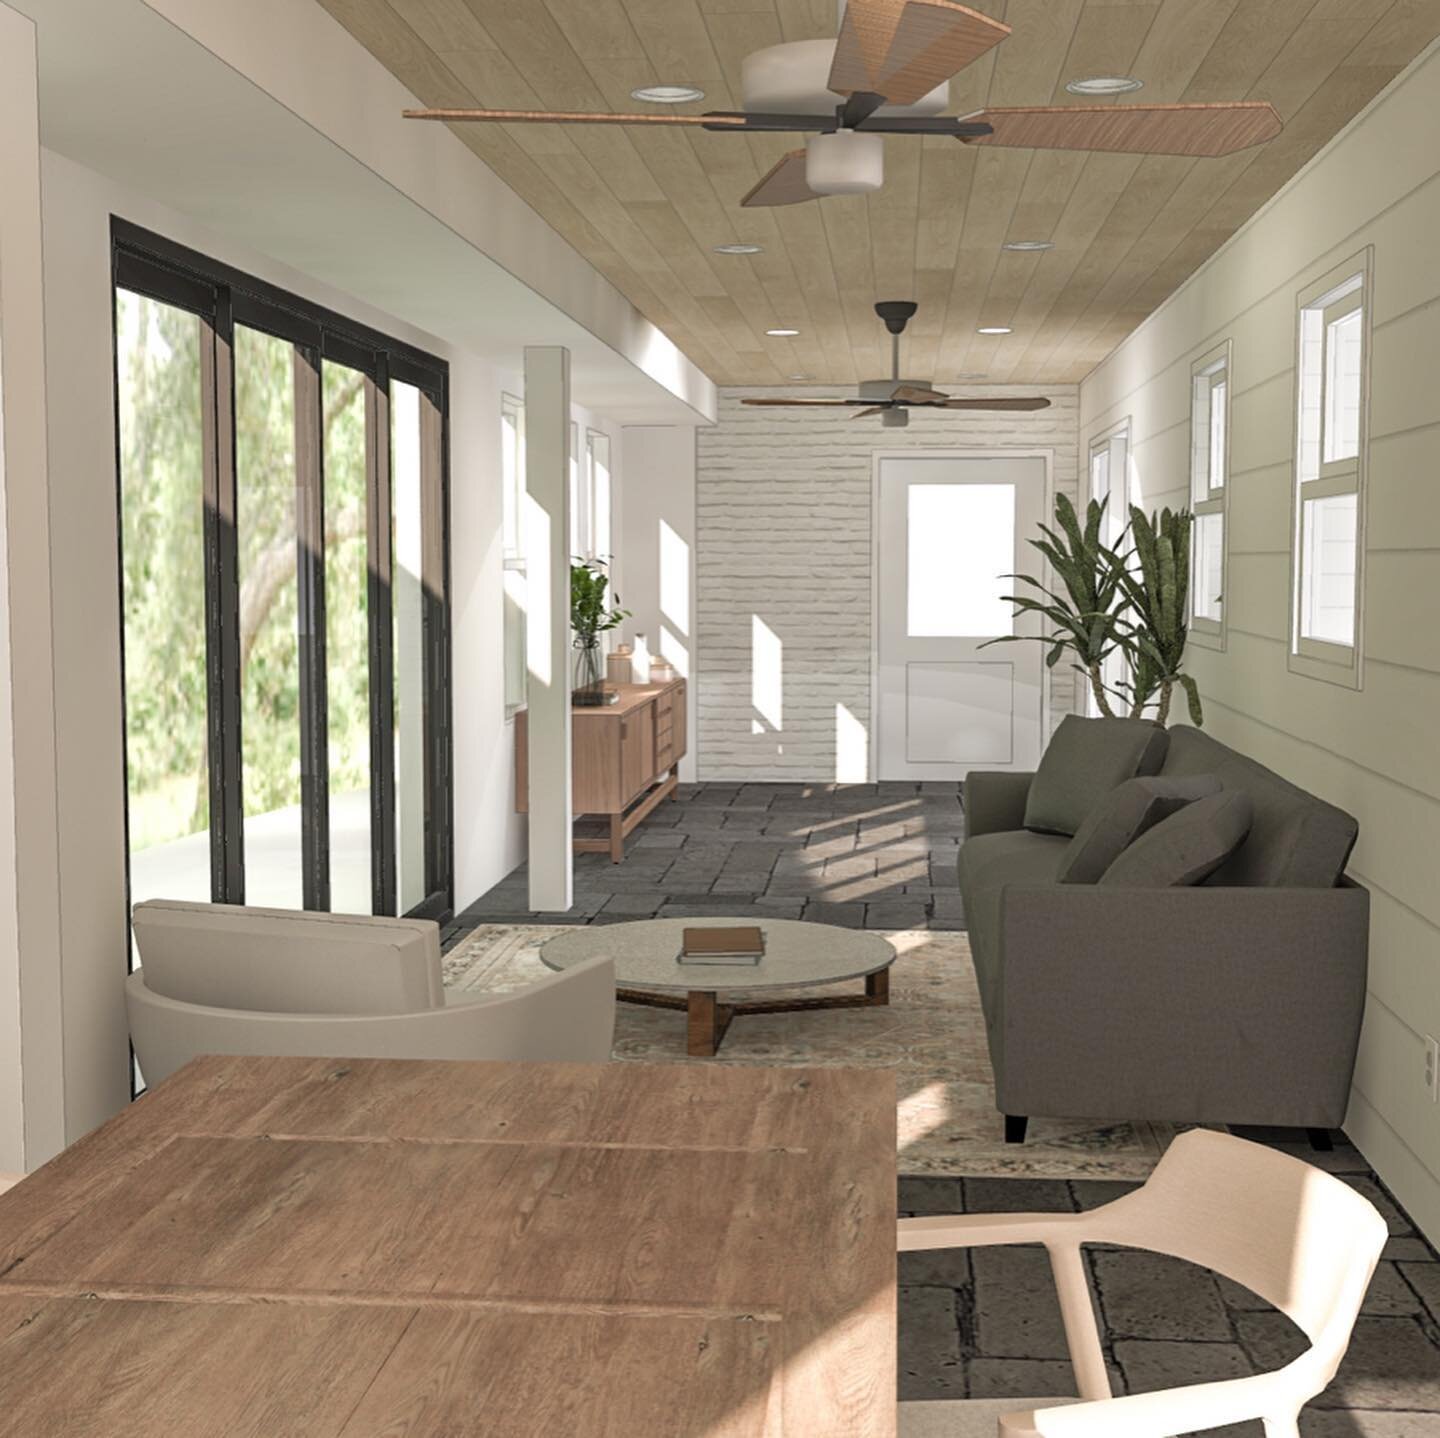 Ever feel like you just can&rsquo;t imagine how a space would look remodeled? You aren&rsquo;t alone! 
A friend of mine, @taylor_madehomes is remodeling this dreamy home, and we created these renderings of the sunroom for him to show potential buyers